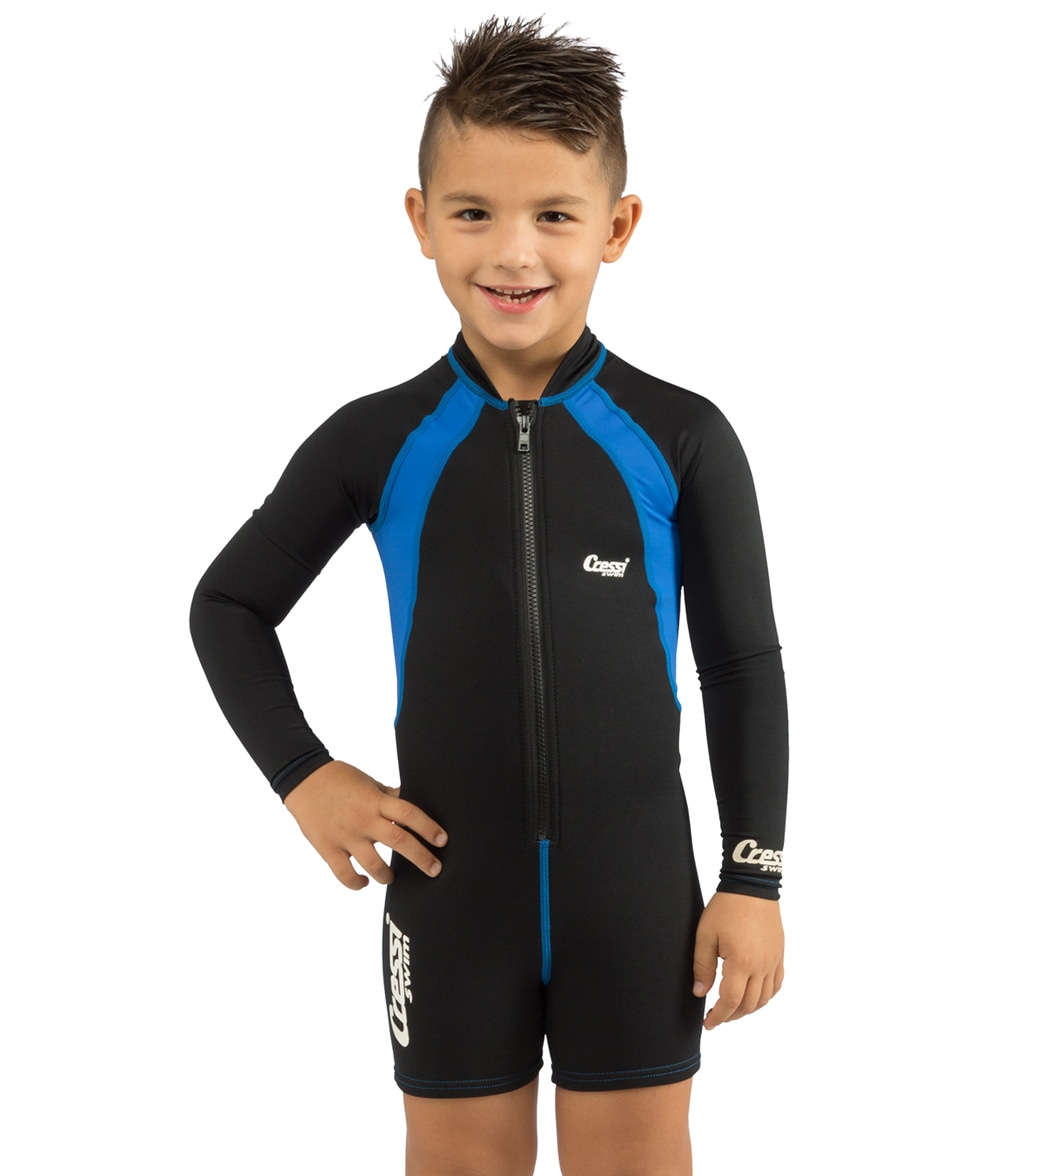 Cressi Boys' Long Sleeve Spring Suit at SwimOutlet.com